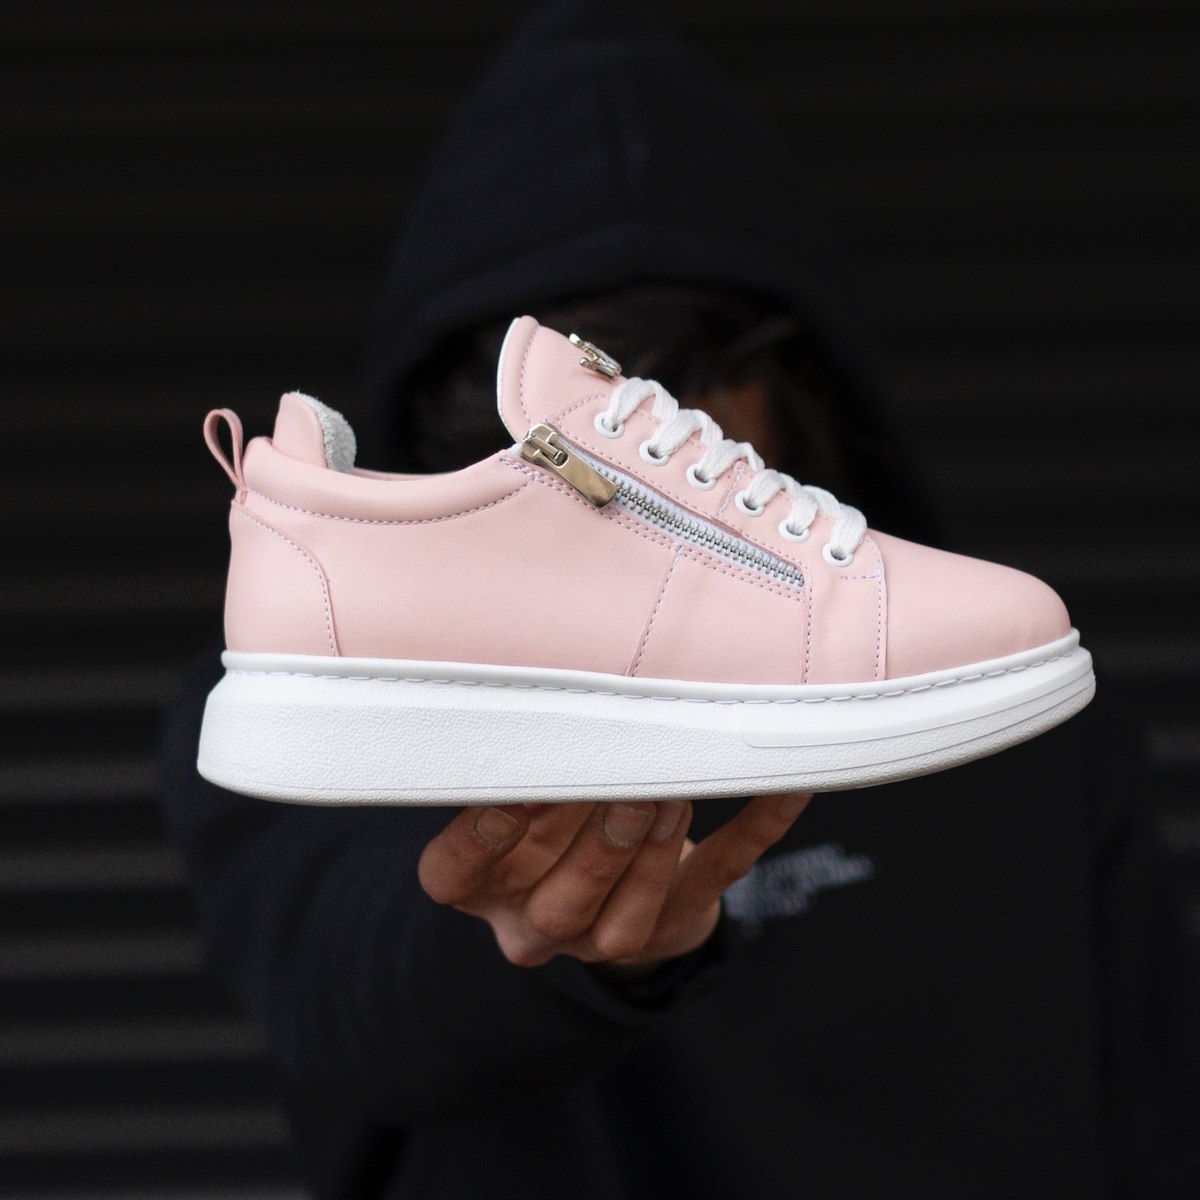 Woman Hype Sole Zipped Style Full Pink Sneakers